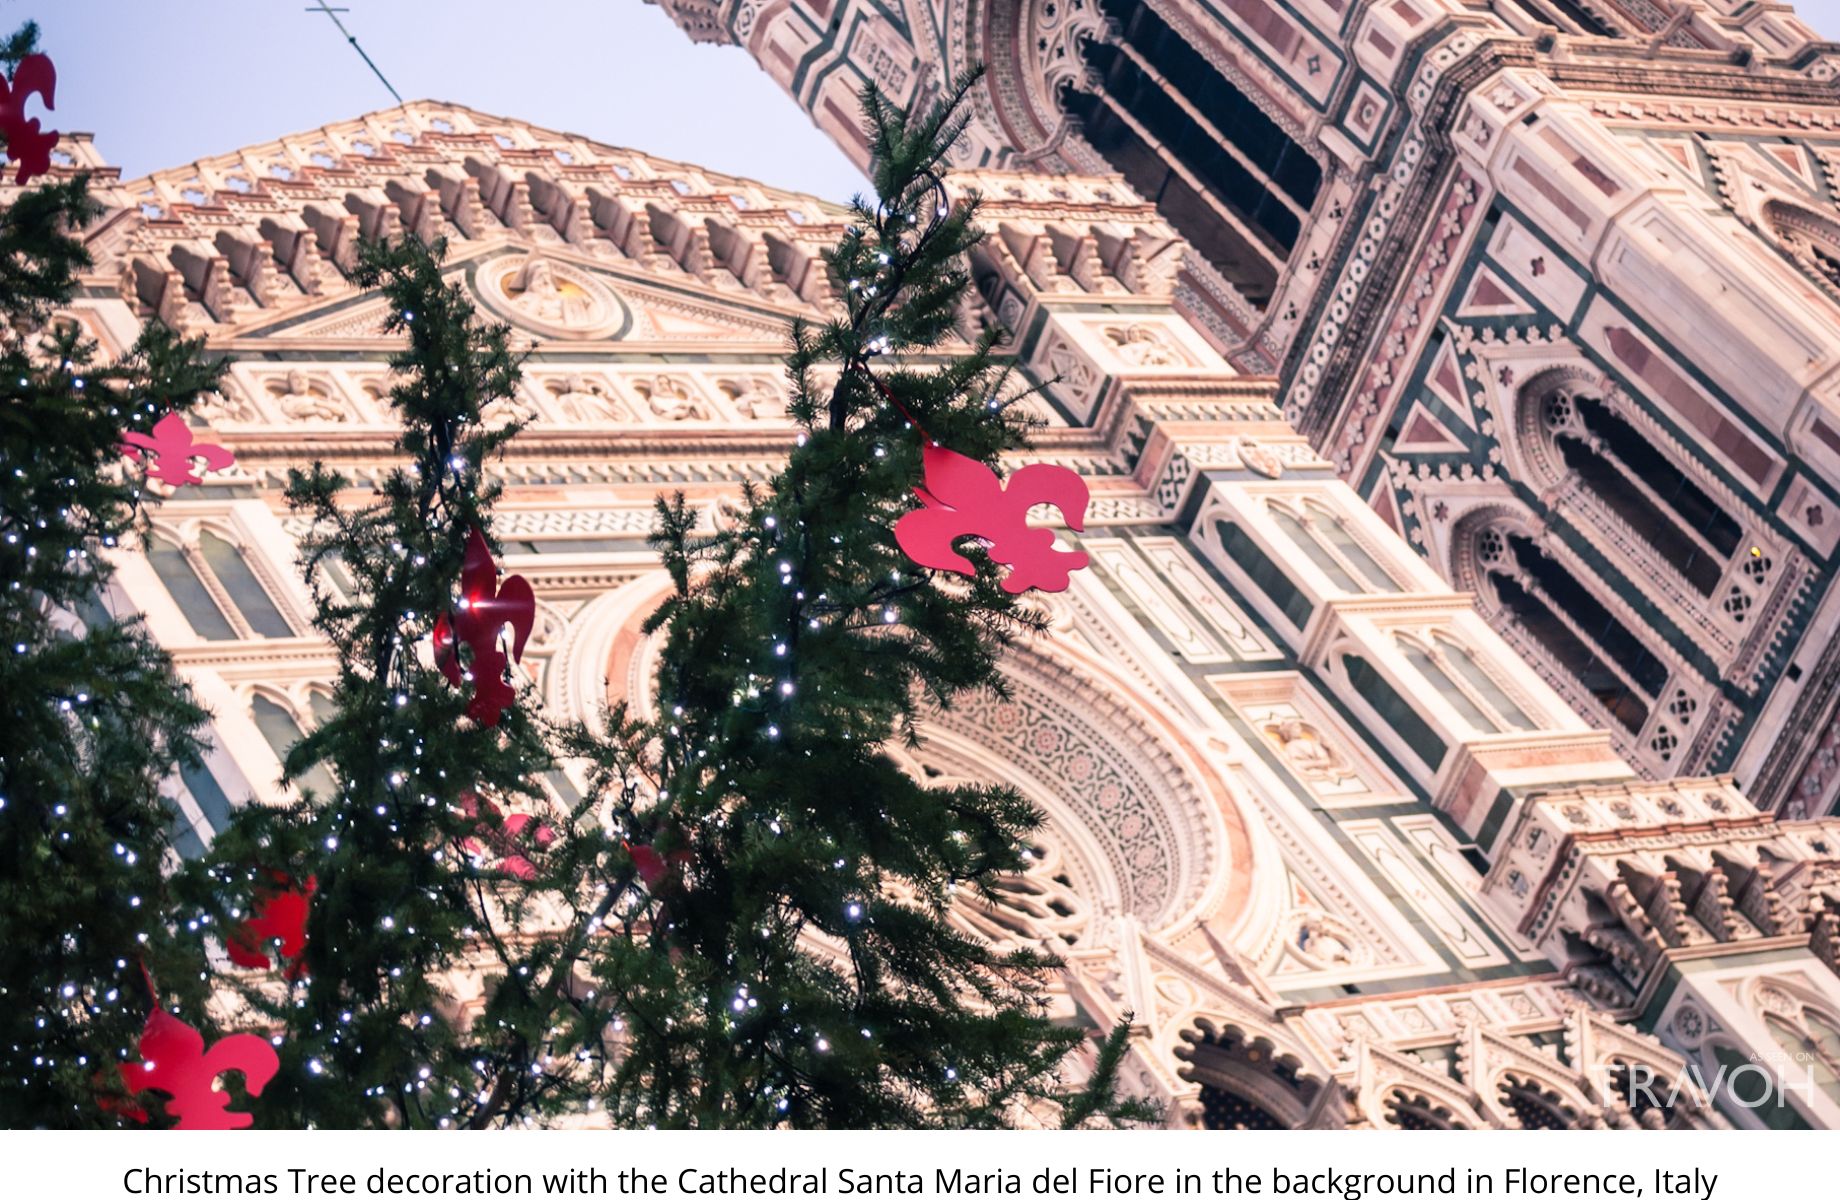 Christmas Tree decoration with the Cathedral Santa Maria del Fore in the background in Florence, Italy